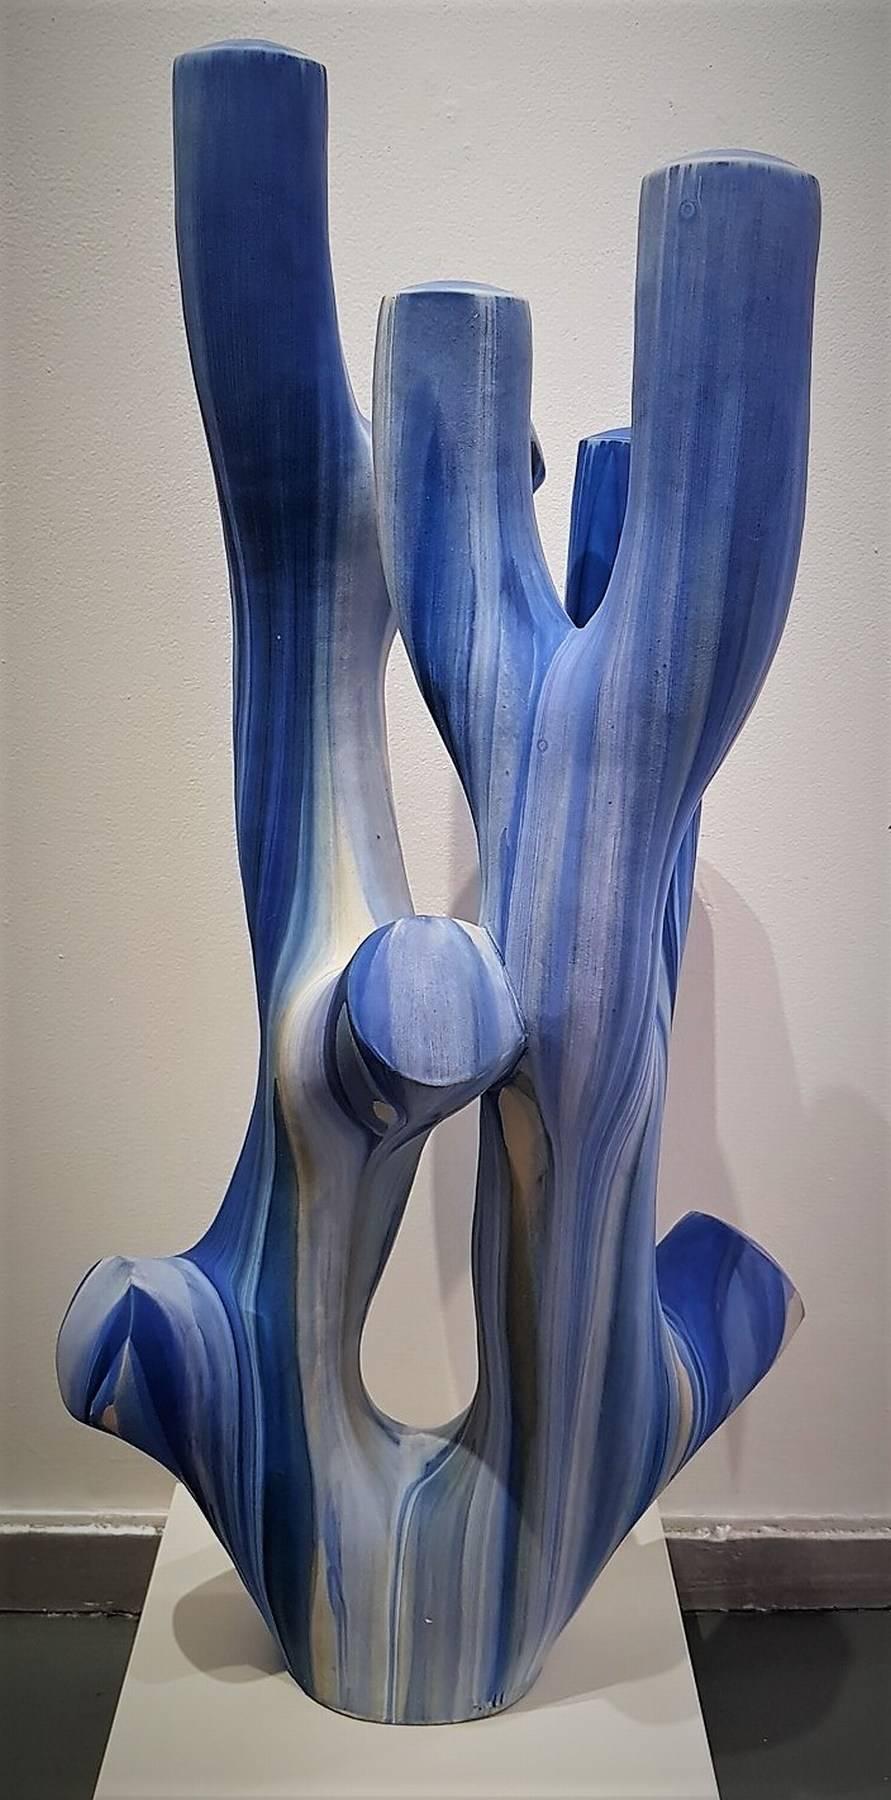 The Blue Wall - Contemporary Sculpture by Trey Hill